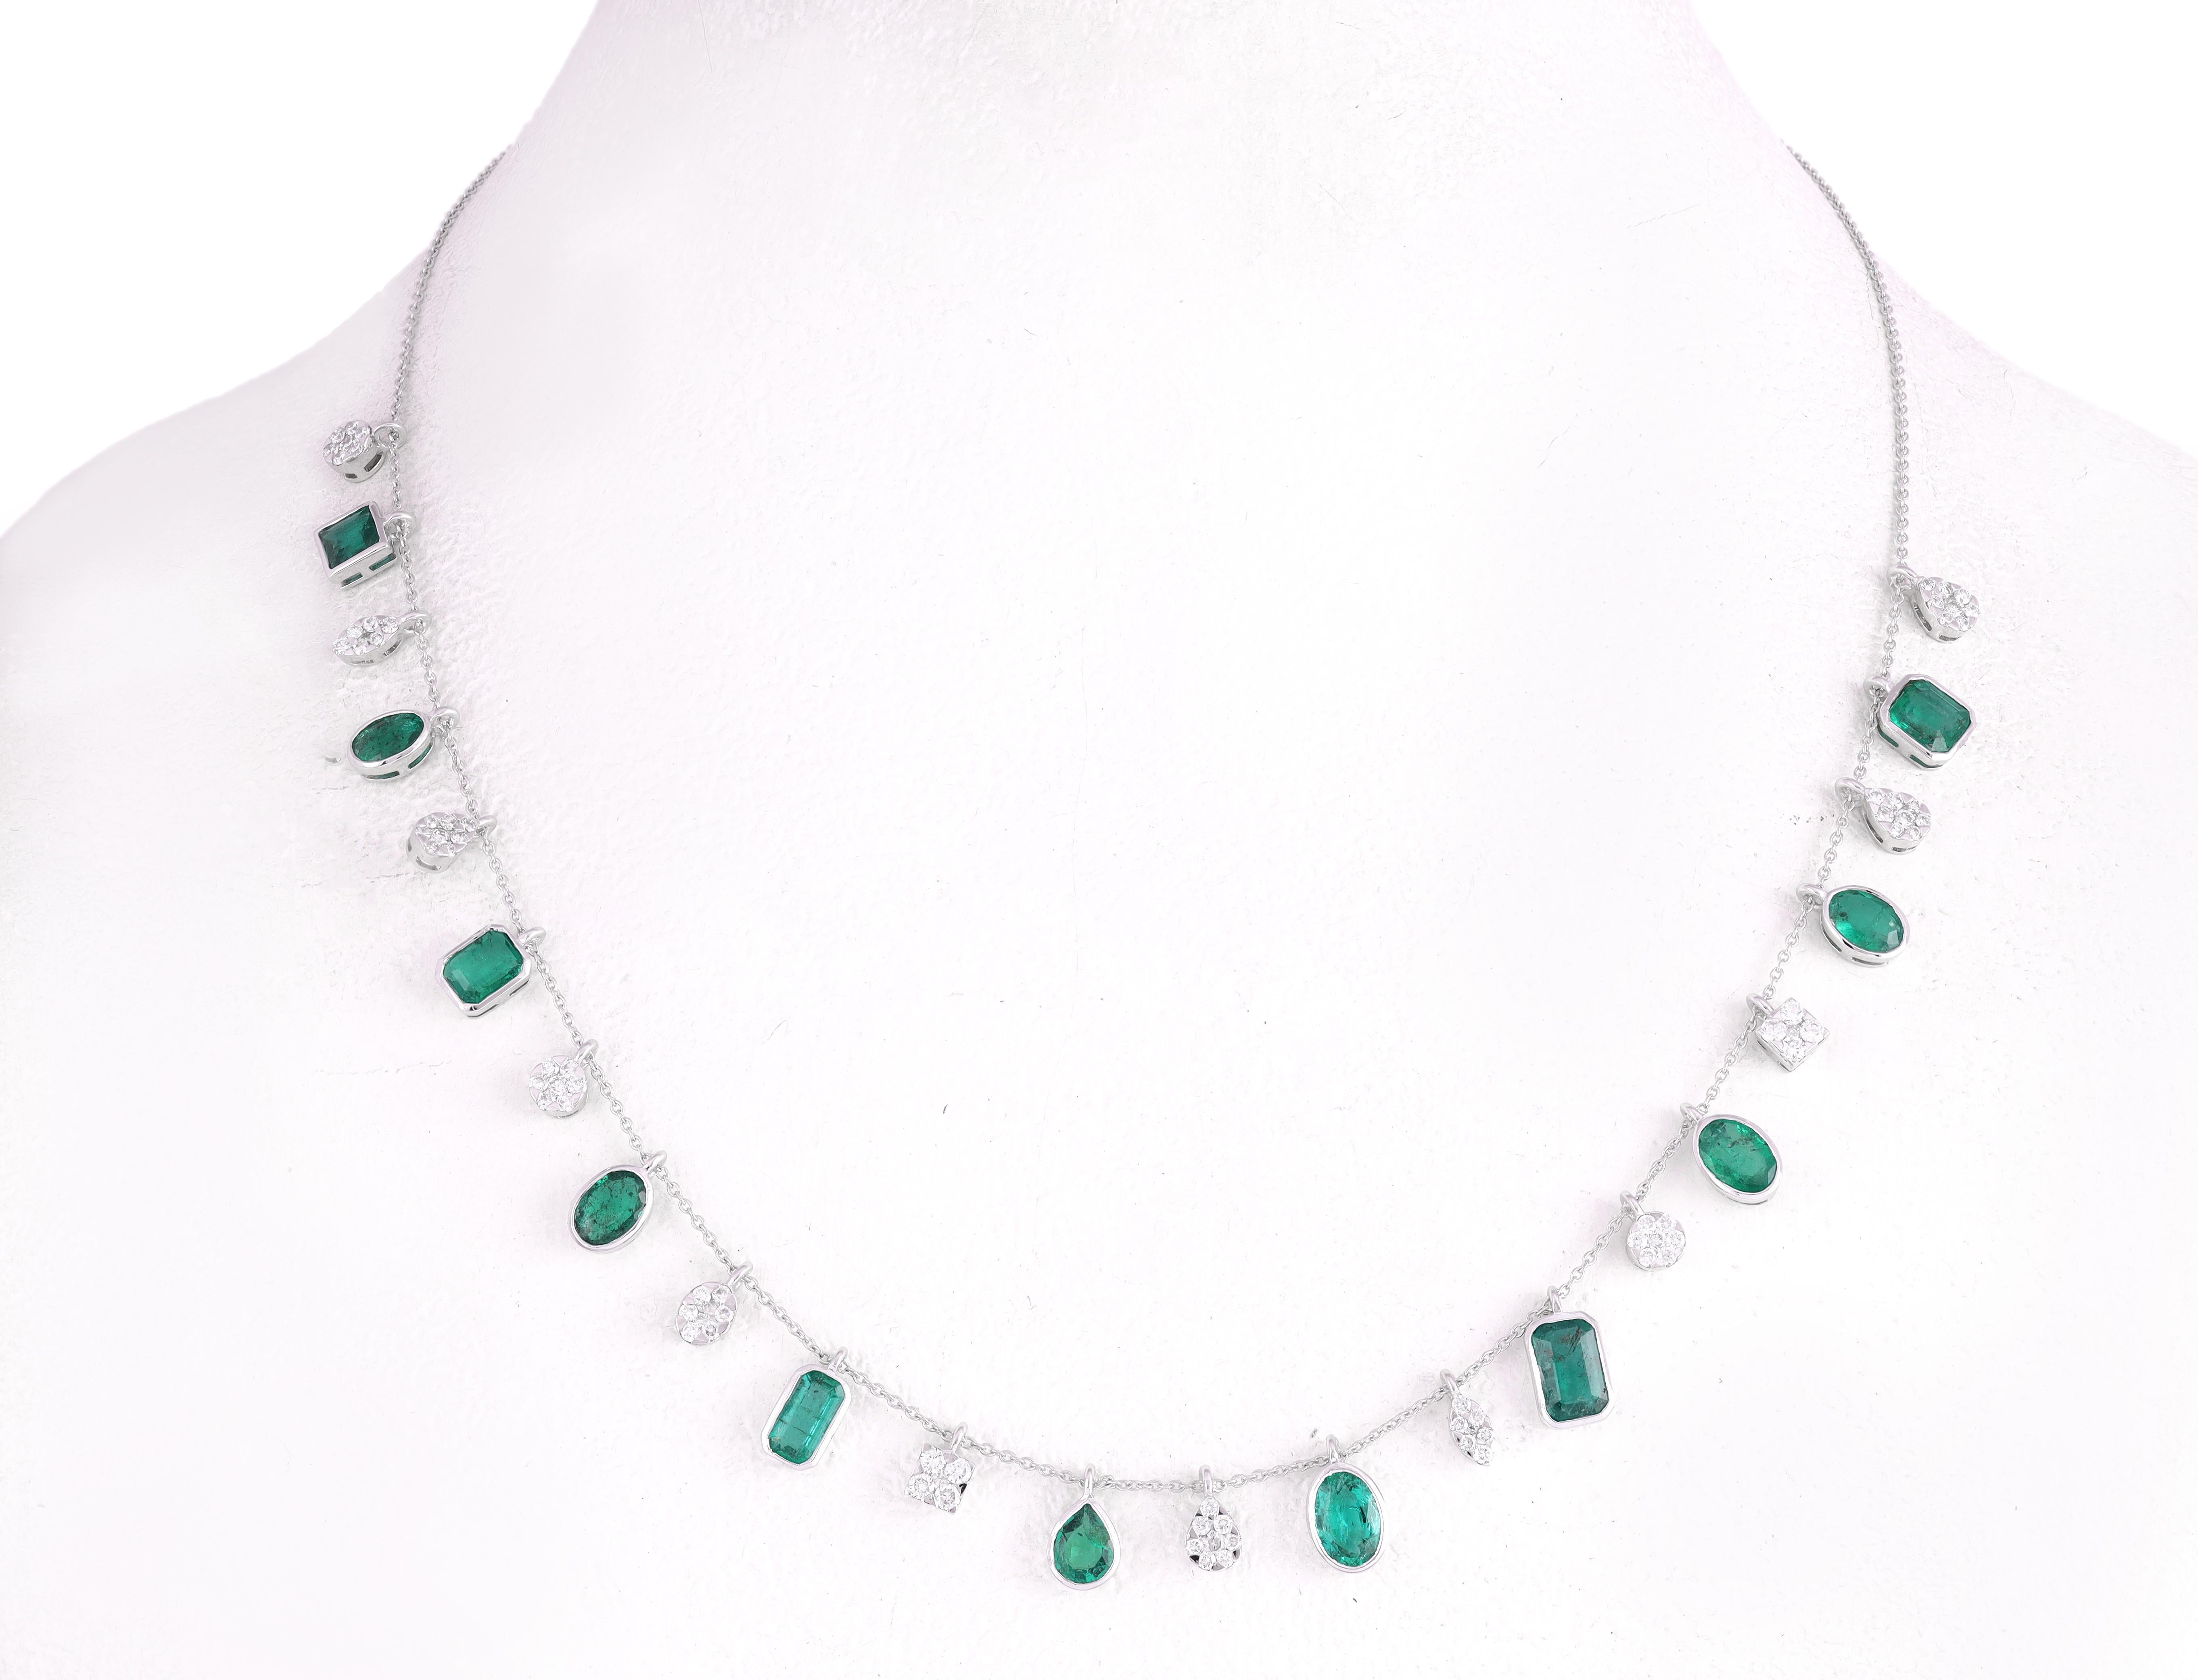  7.34 Carat Emerald & Diamond Chain Necklace in 18k White Gold 
White Gold studded with mix cut Emerald pieces.
Accessorize your look with this elegant Clear Emerald chain necklace. This stunning piece of jewelry instantly elevates a casual look or